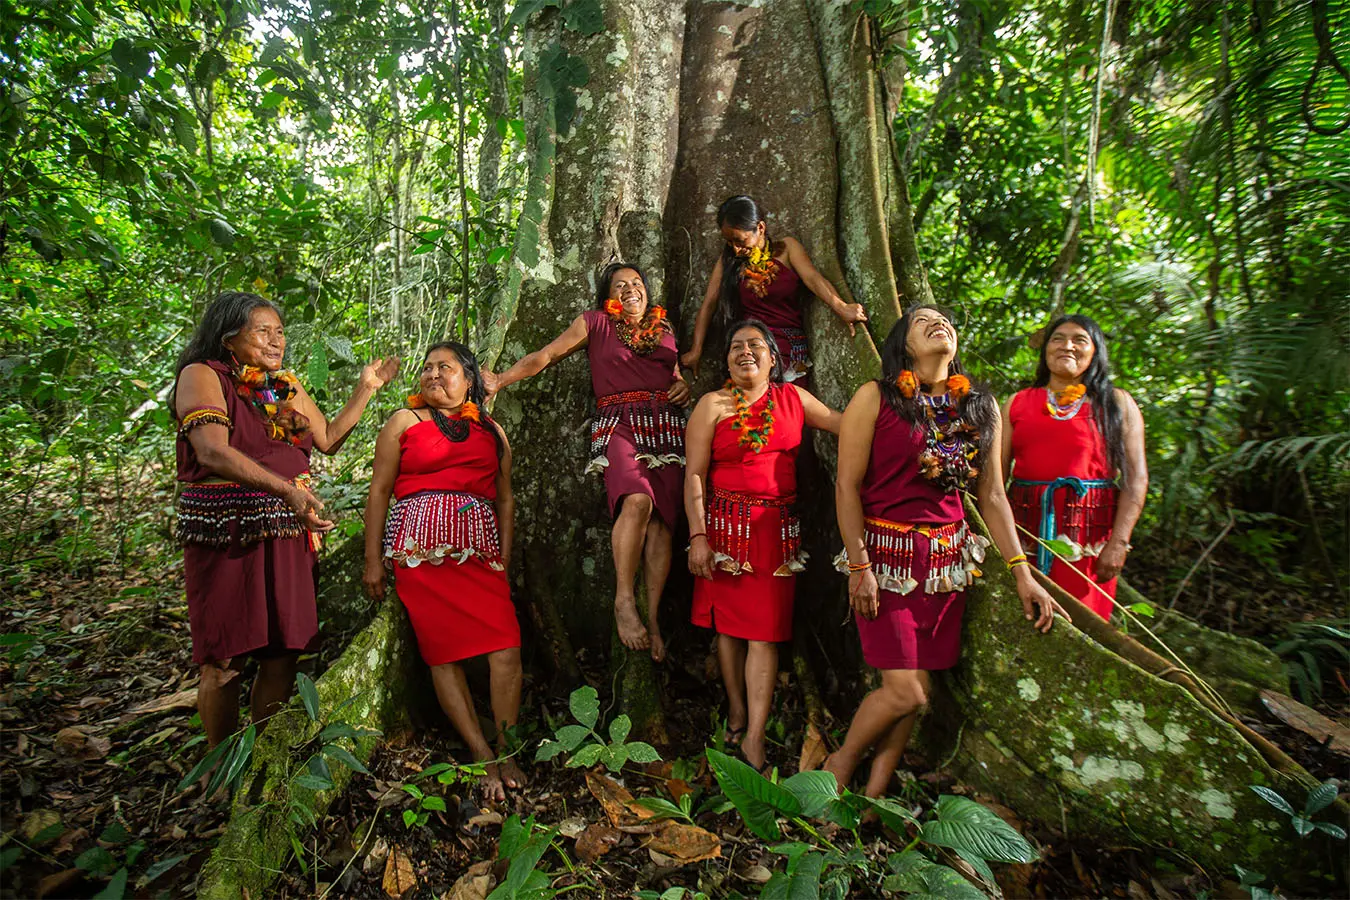 Women in Peru's Nuwas Forest are an important part of forestry conservation